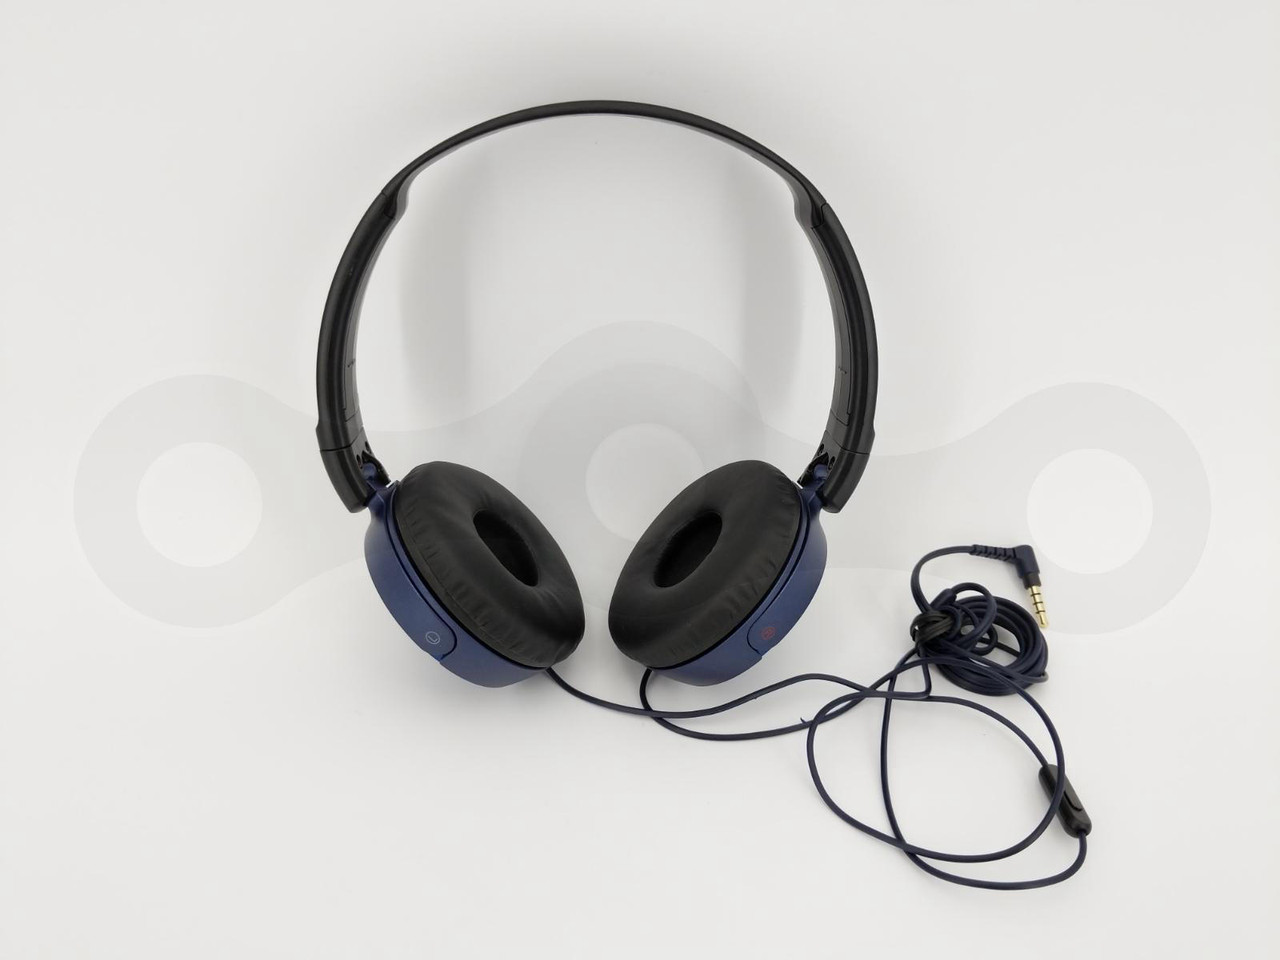 HEADPHONES BLUE MDR-ZX310 CORDED ONLY BLACK COLLAPSIBLE WIRED HEADBAND MIC SONY